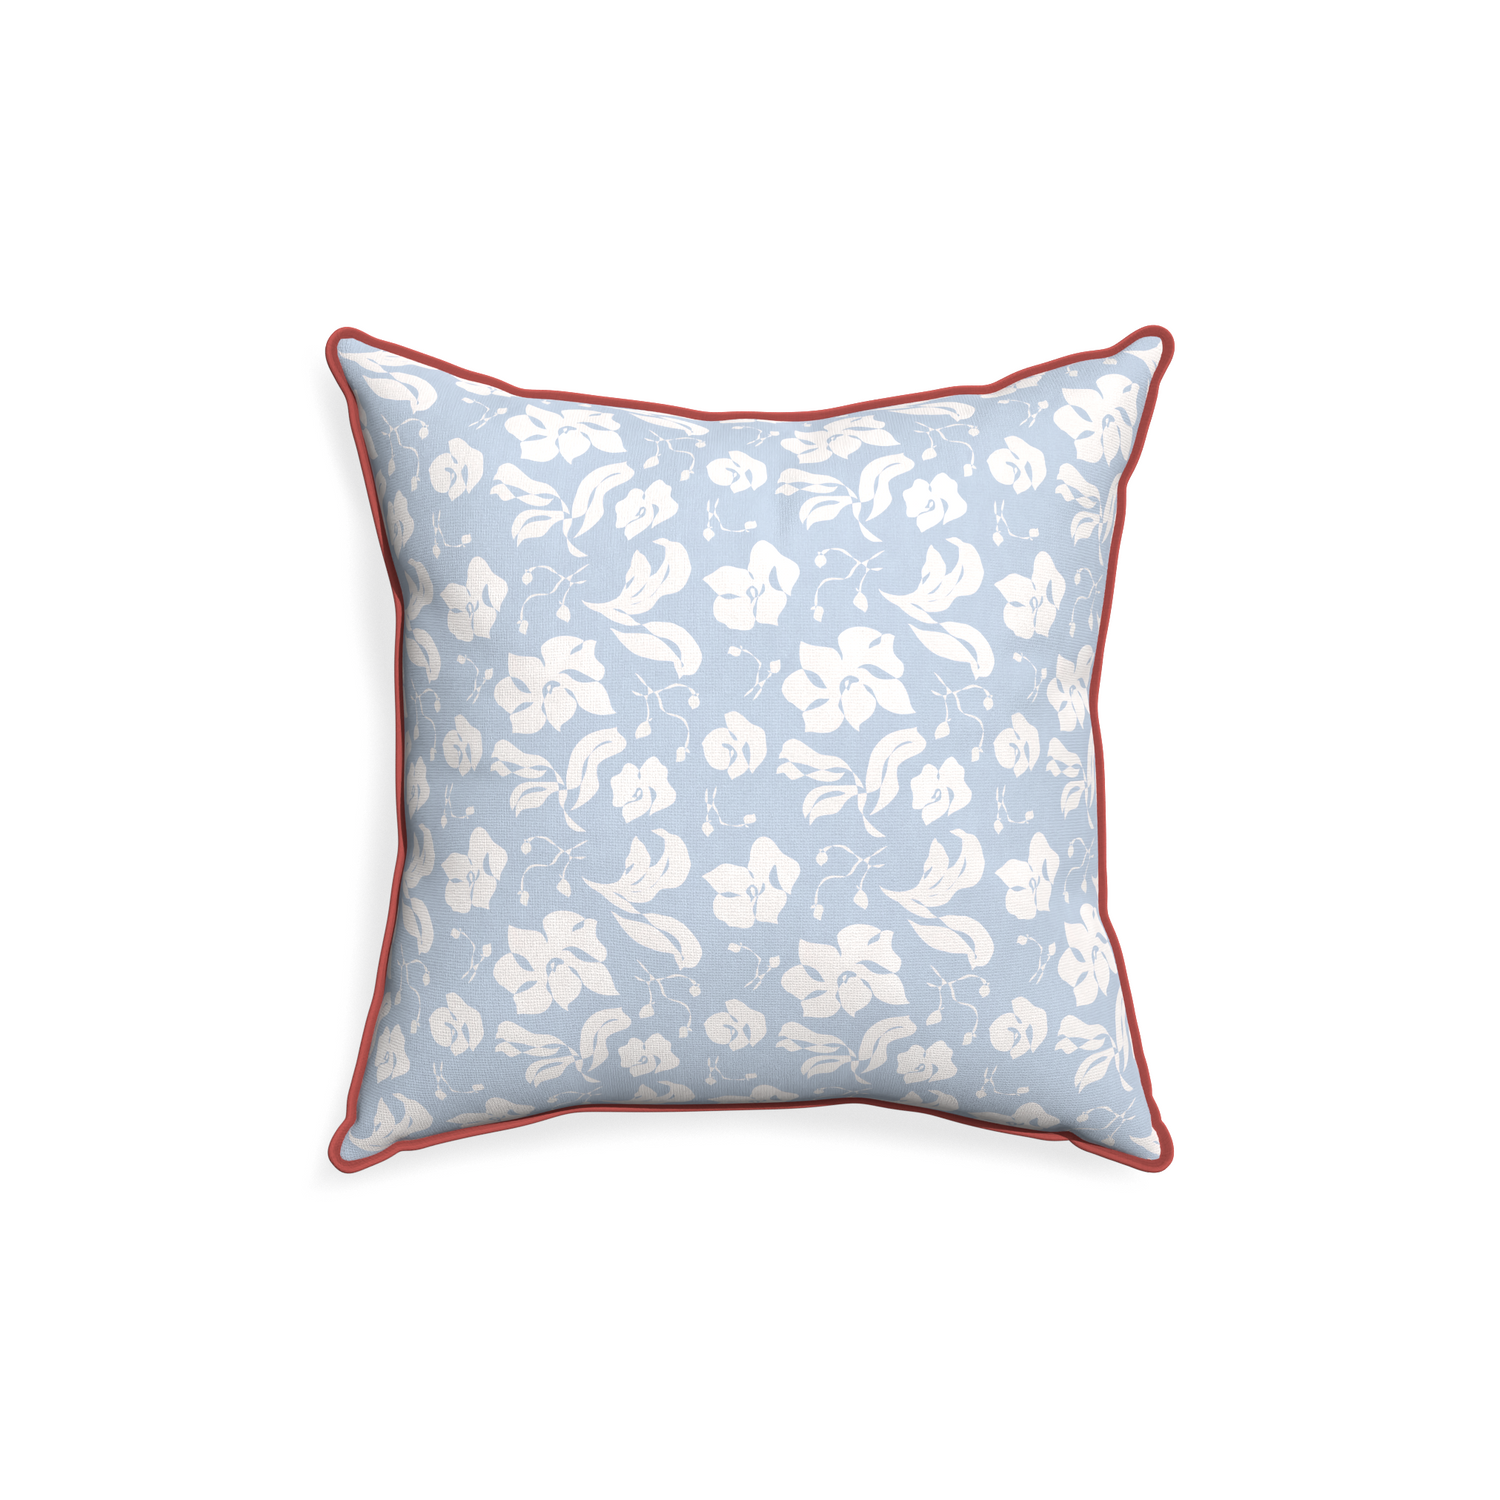 18-square georgia custom cornflower blue floralpillow with c piping on white background